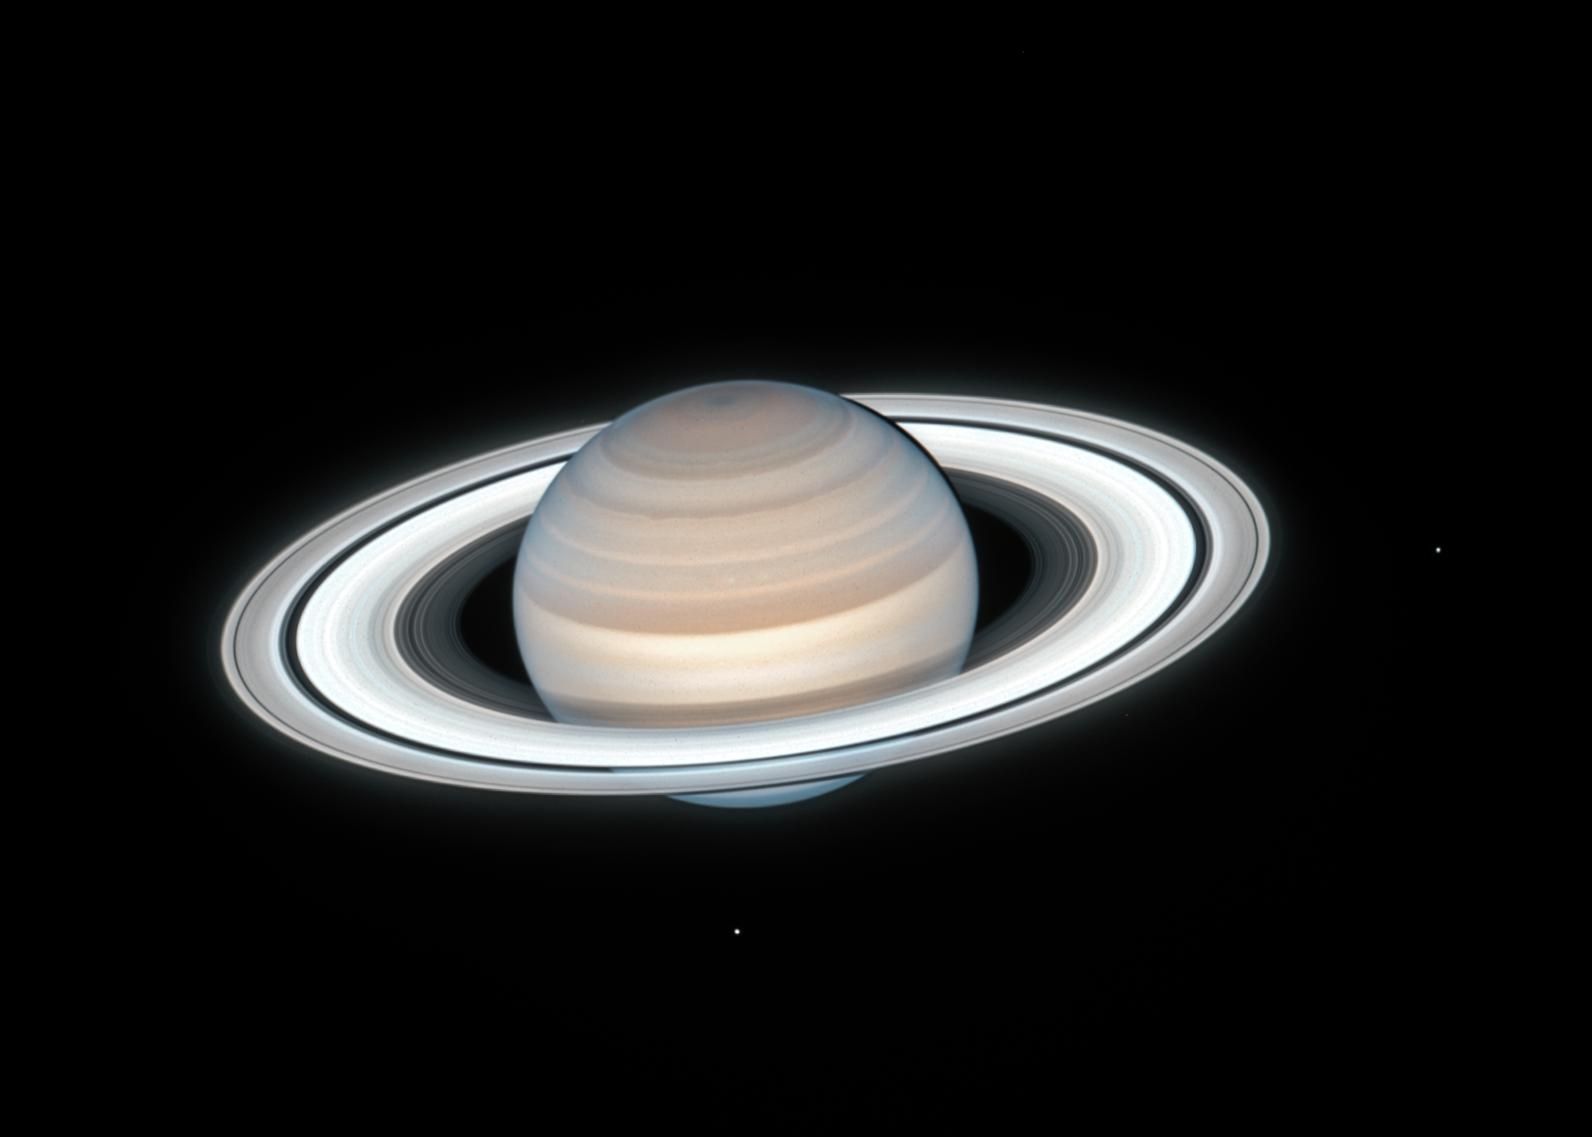 Saturn and its rings appear to glow against the darkness of space. At right and at middle bottom, two small dots can be seen: they are two of Saturn's moons - Mimas and Enceladus, respectively. Saturn itself takes on a reddish tint in its northern hemisphere and blue at its bottom. The planet's concentric rings are an icy white.